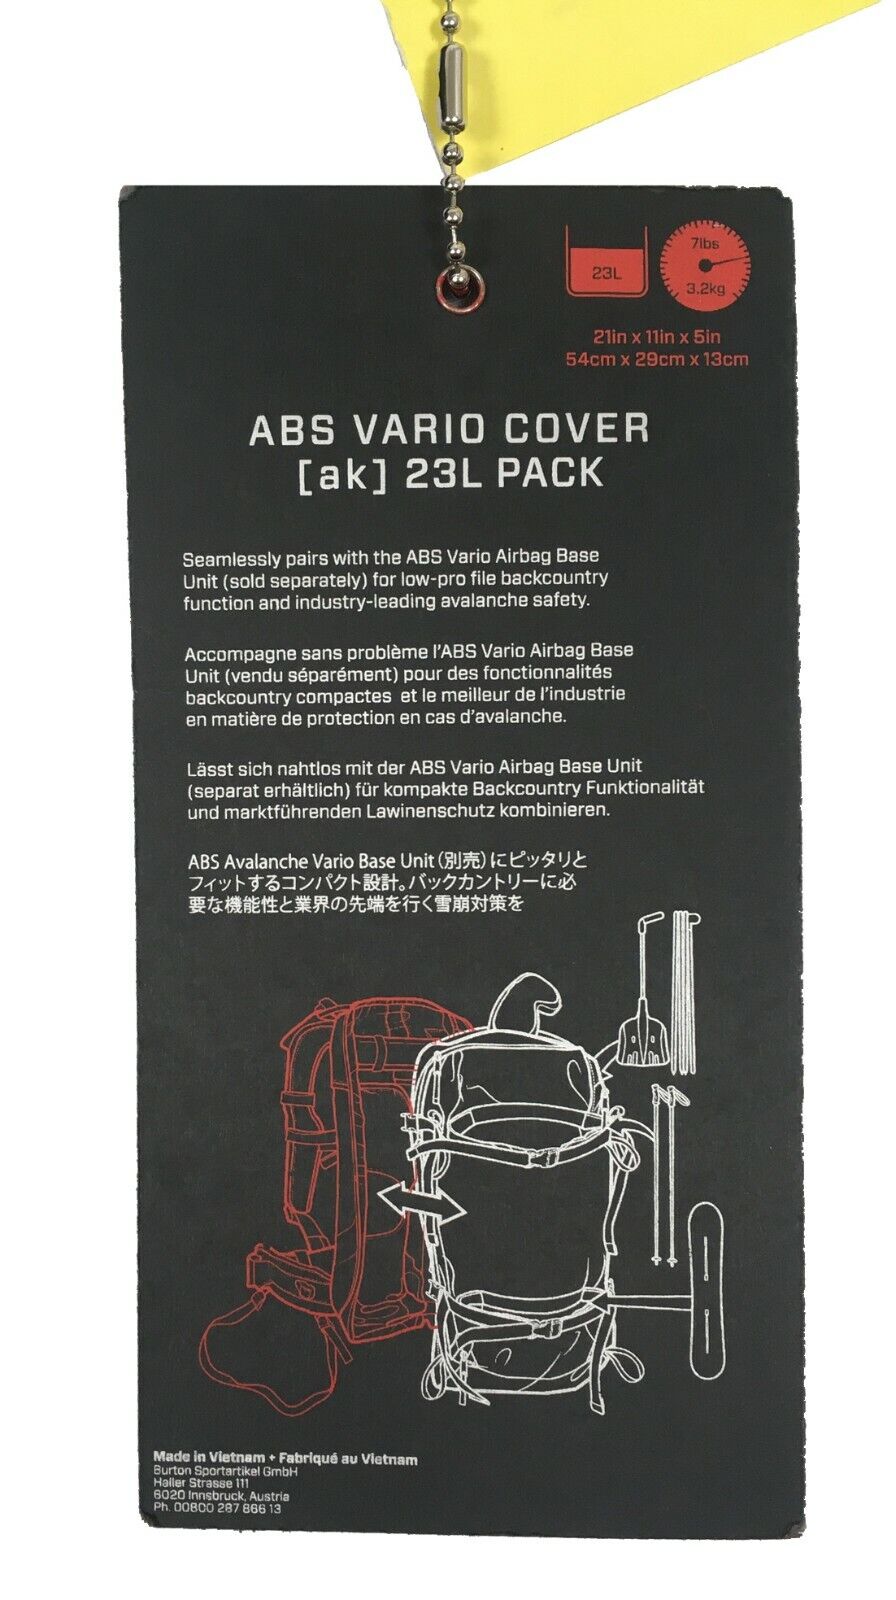 NEW Burton AK ABS Vario Cover Pack! 2 Sizes 23L or 17L Dryride Shell Cordura